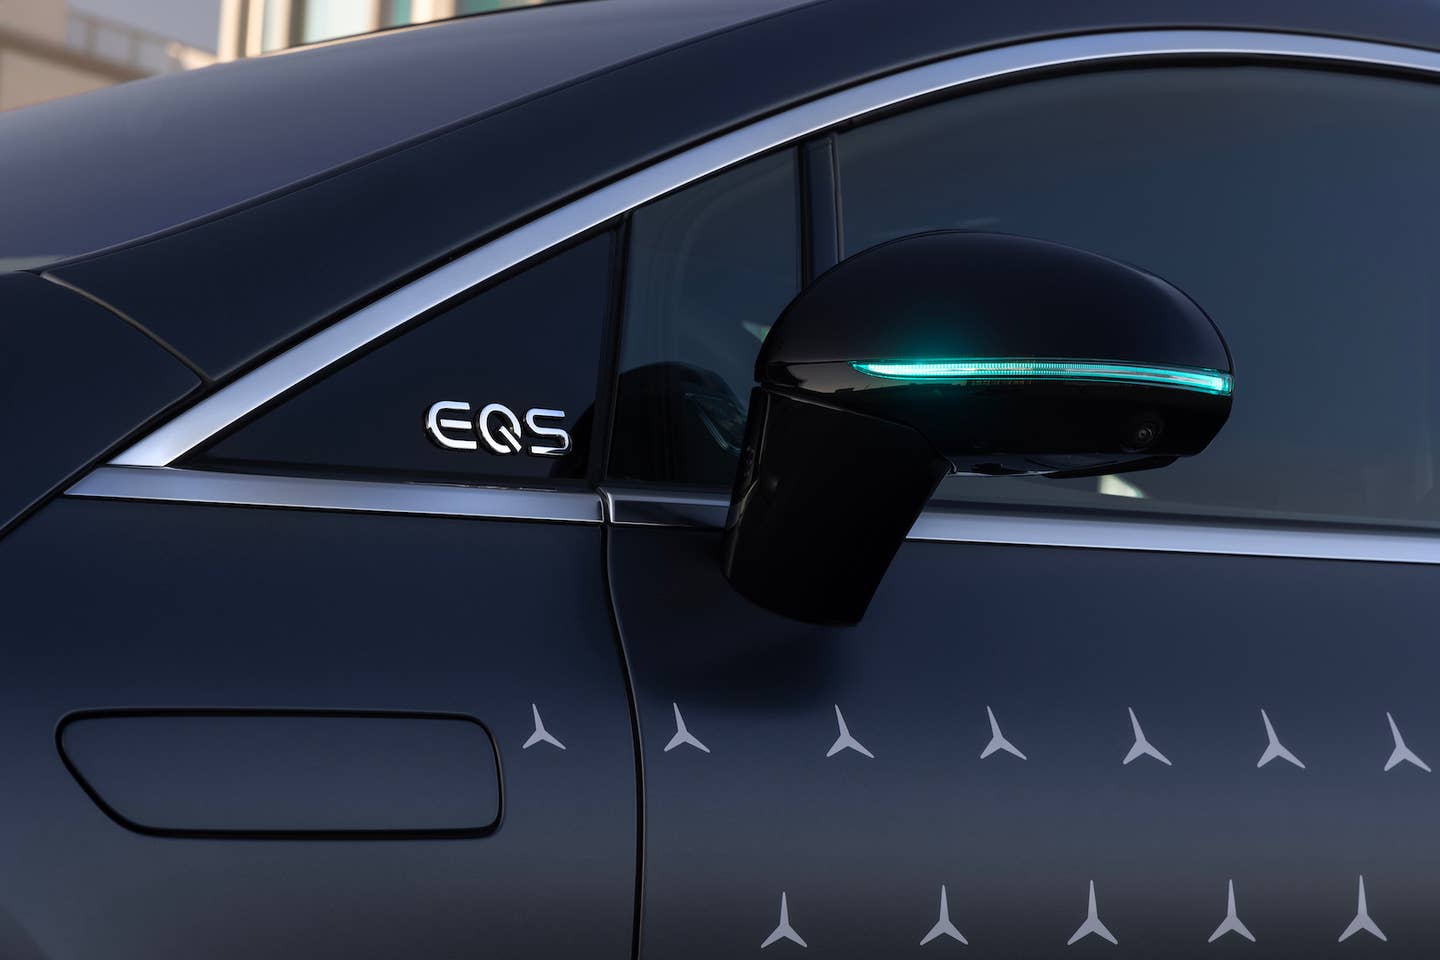 Turquoise lighting elements in a Mercedes-Benz EQS